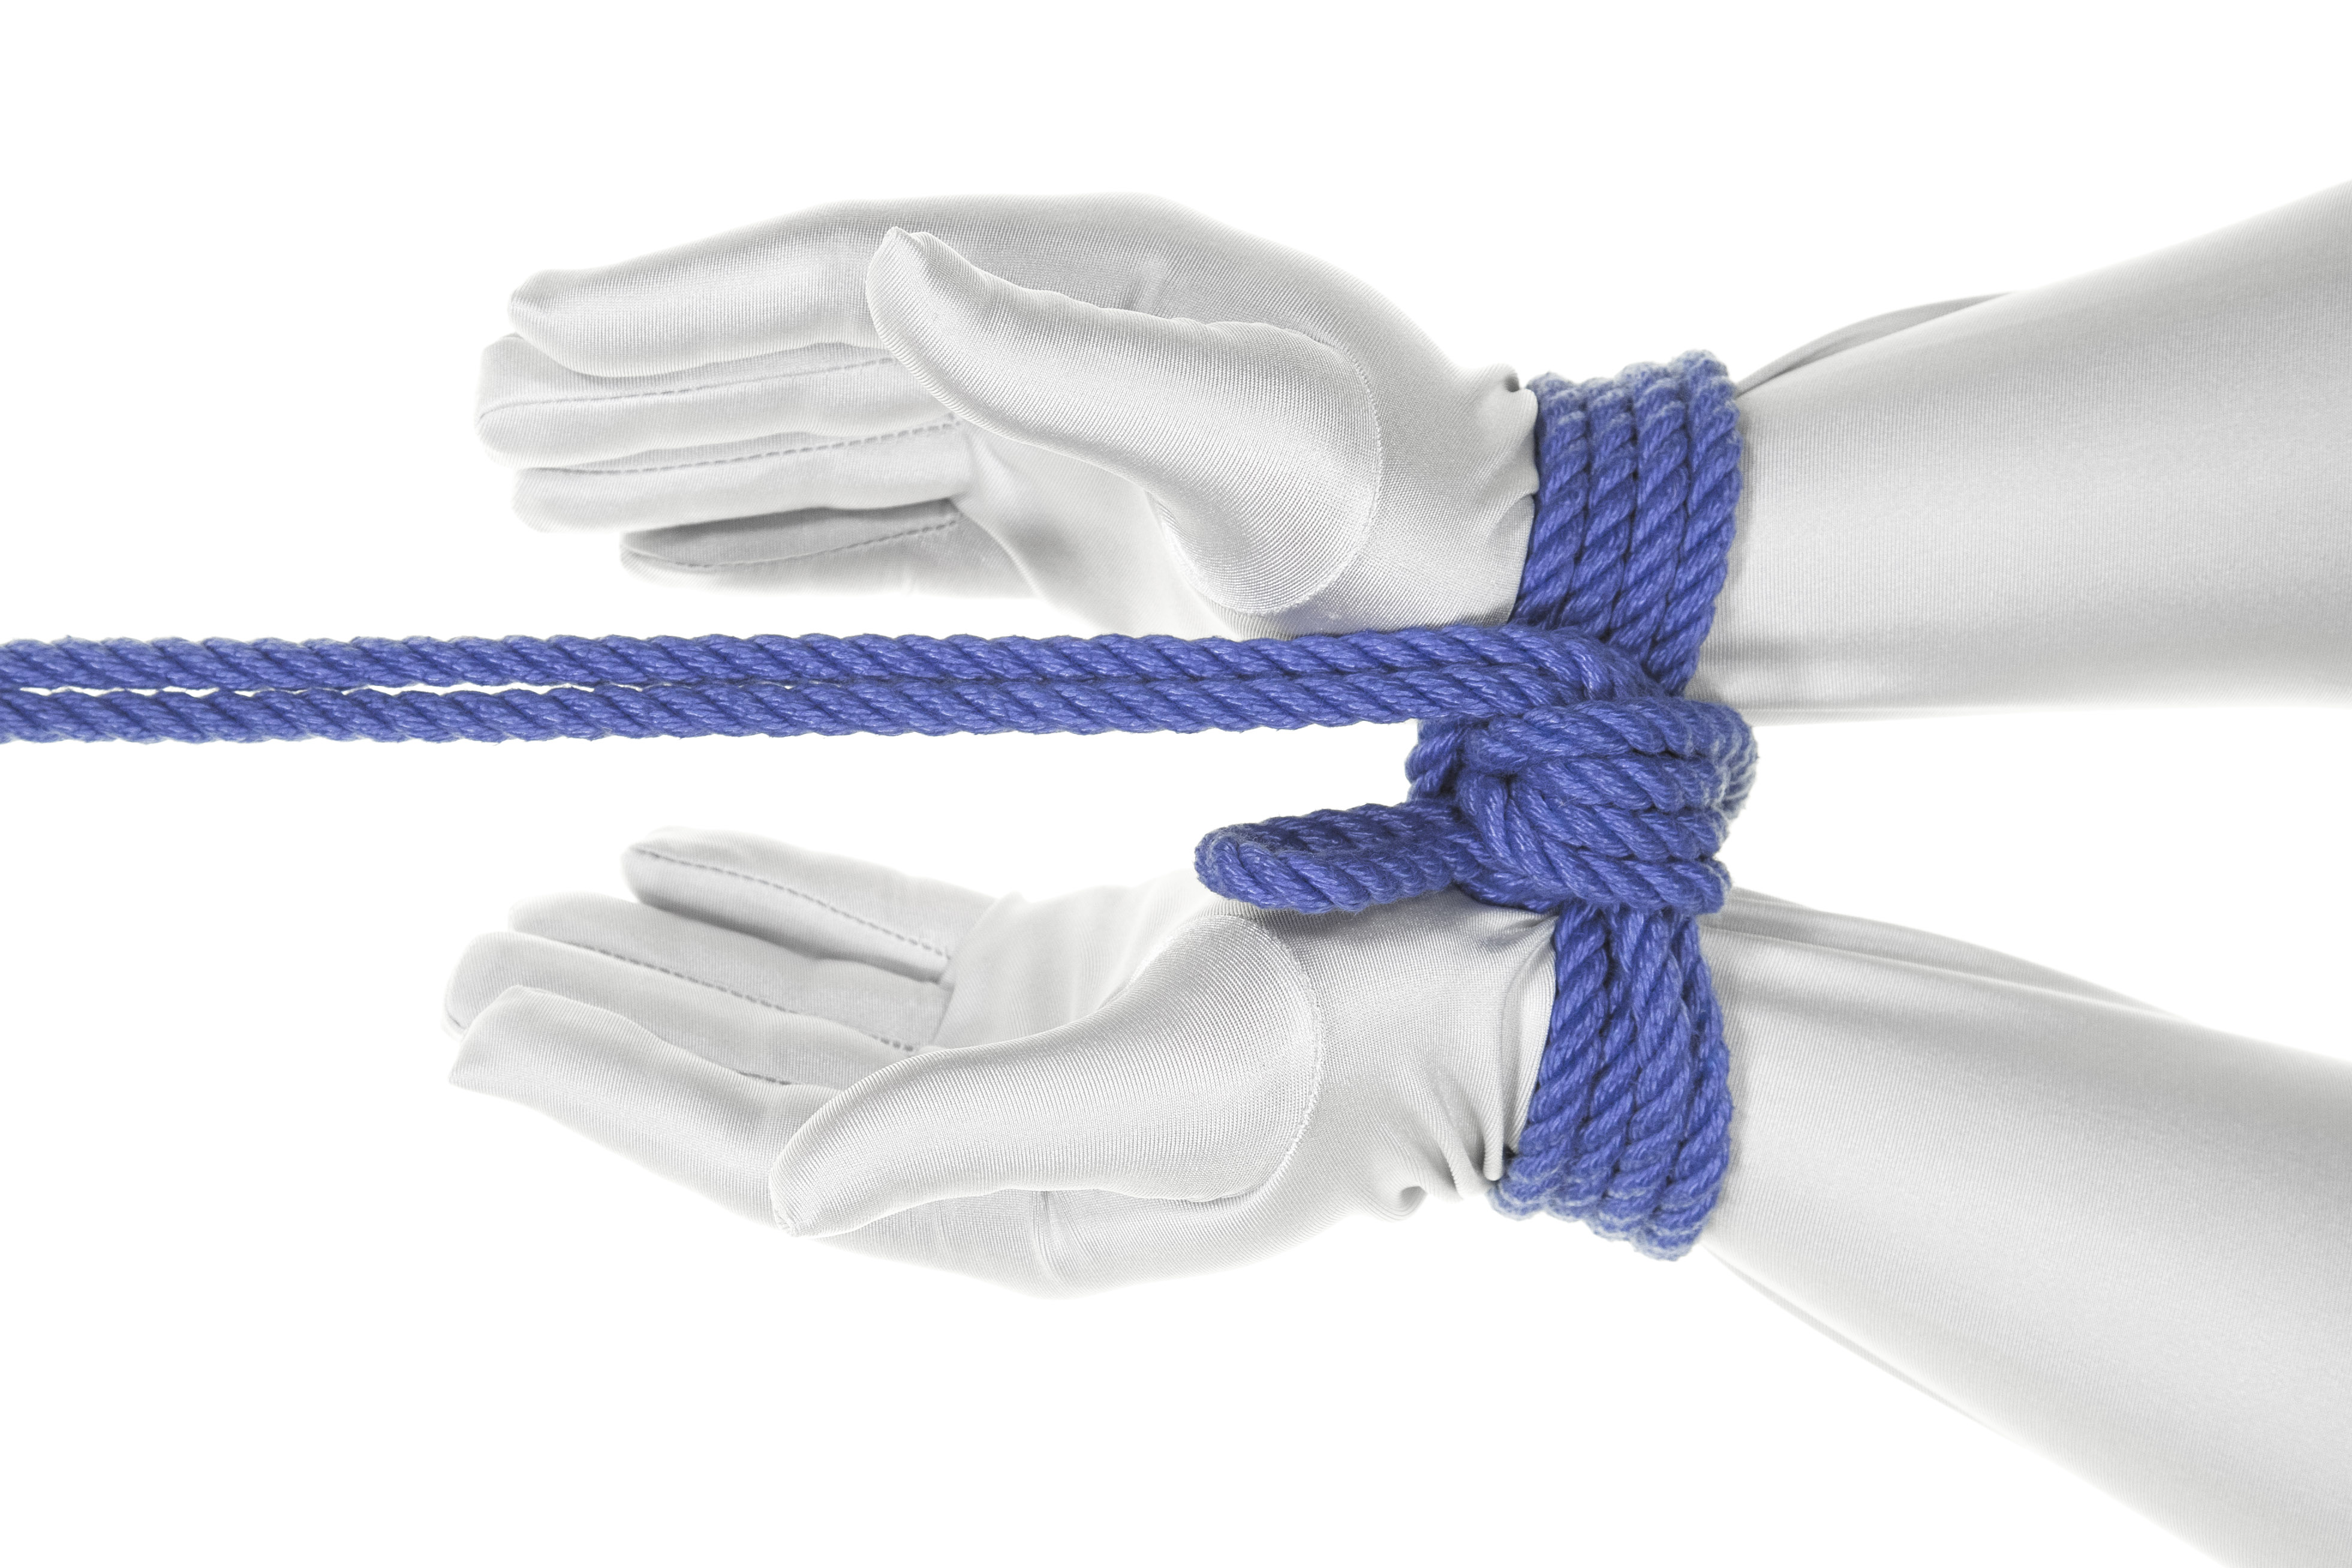 A top view of two hands wearing a white bodysuit tied together with a blue rope. We are looking from above. The hands enter the frame from the right and are separated by two or three inches. The hands face each other and are slightly cupped. A two column Somerville Bowline has been tied between them with two double wraps of rope going around the wrists. A knot on the top hides our view of the frapping turns that keep the wrists separate. A two inch bight is visible and the ends of the rope exit the frame to the left.